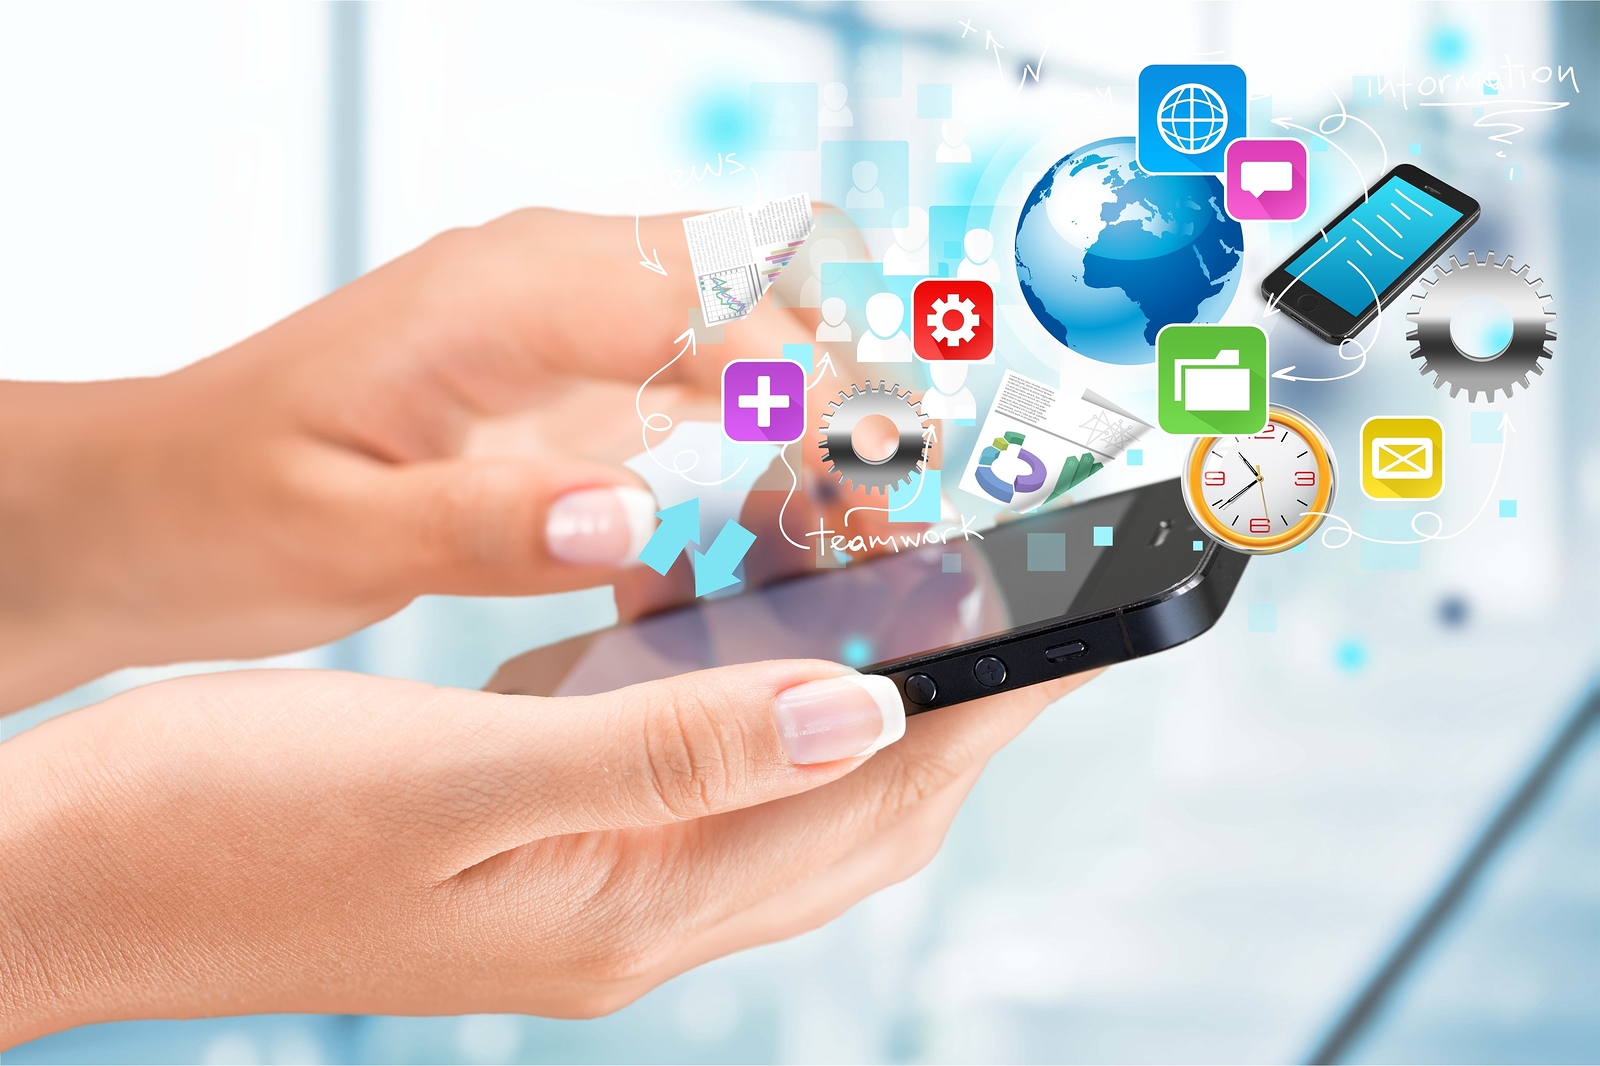 4 Ways to Secure Your Enterprise Mobile Apps